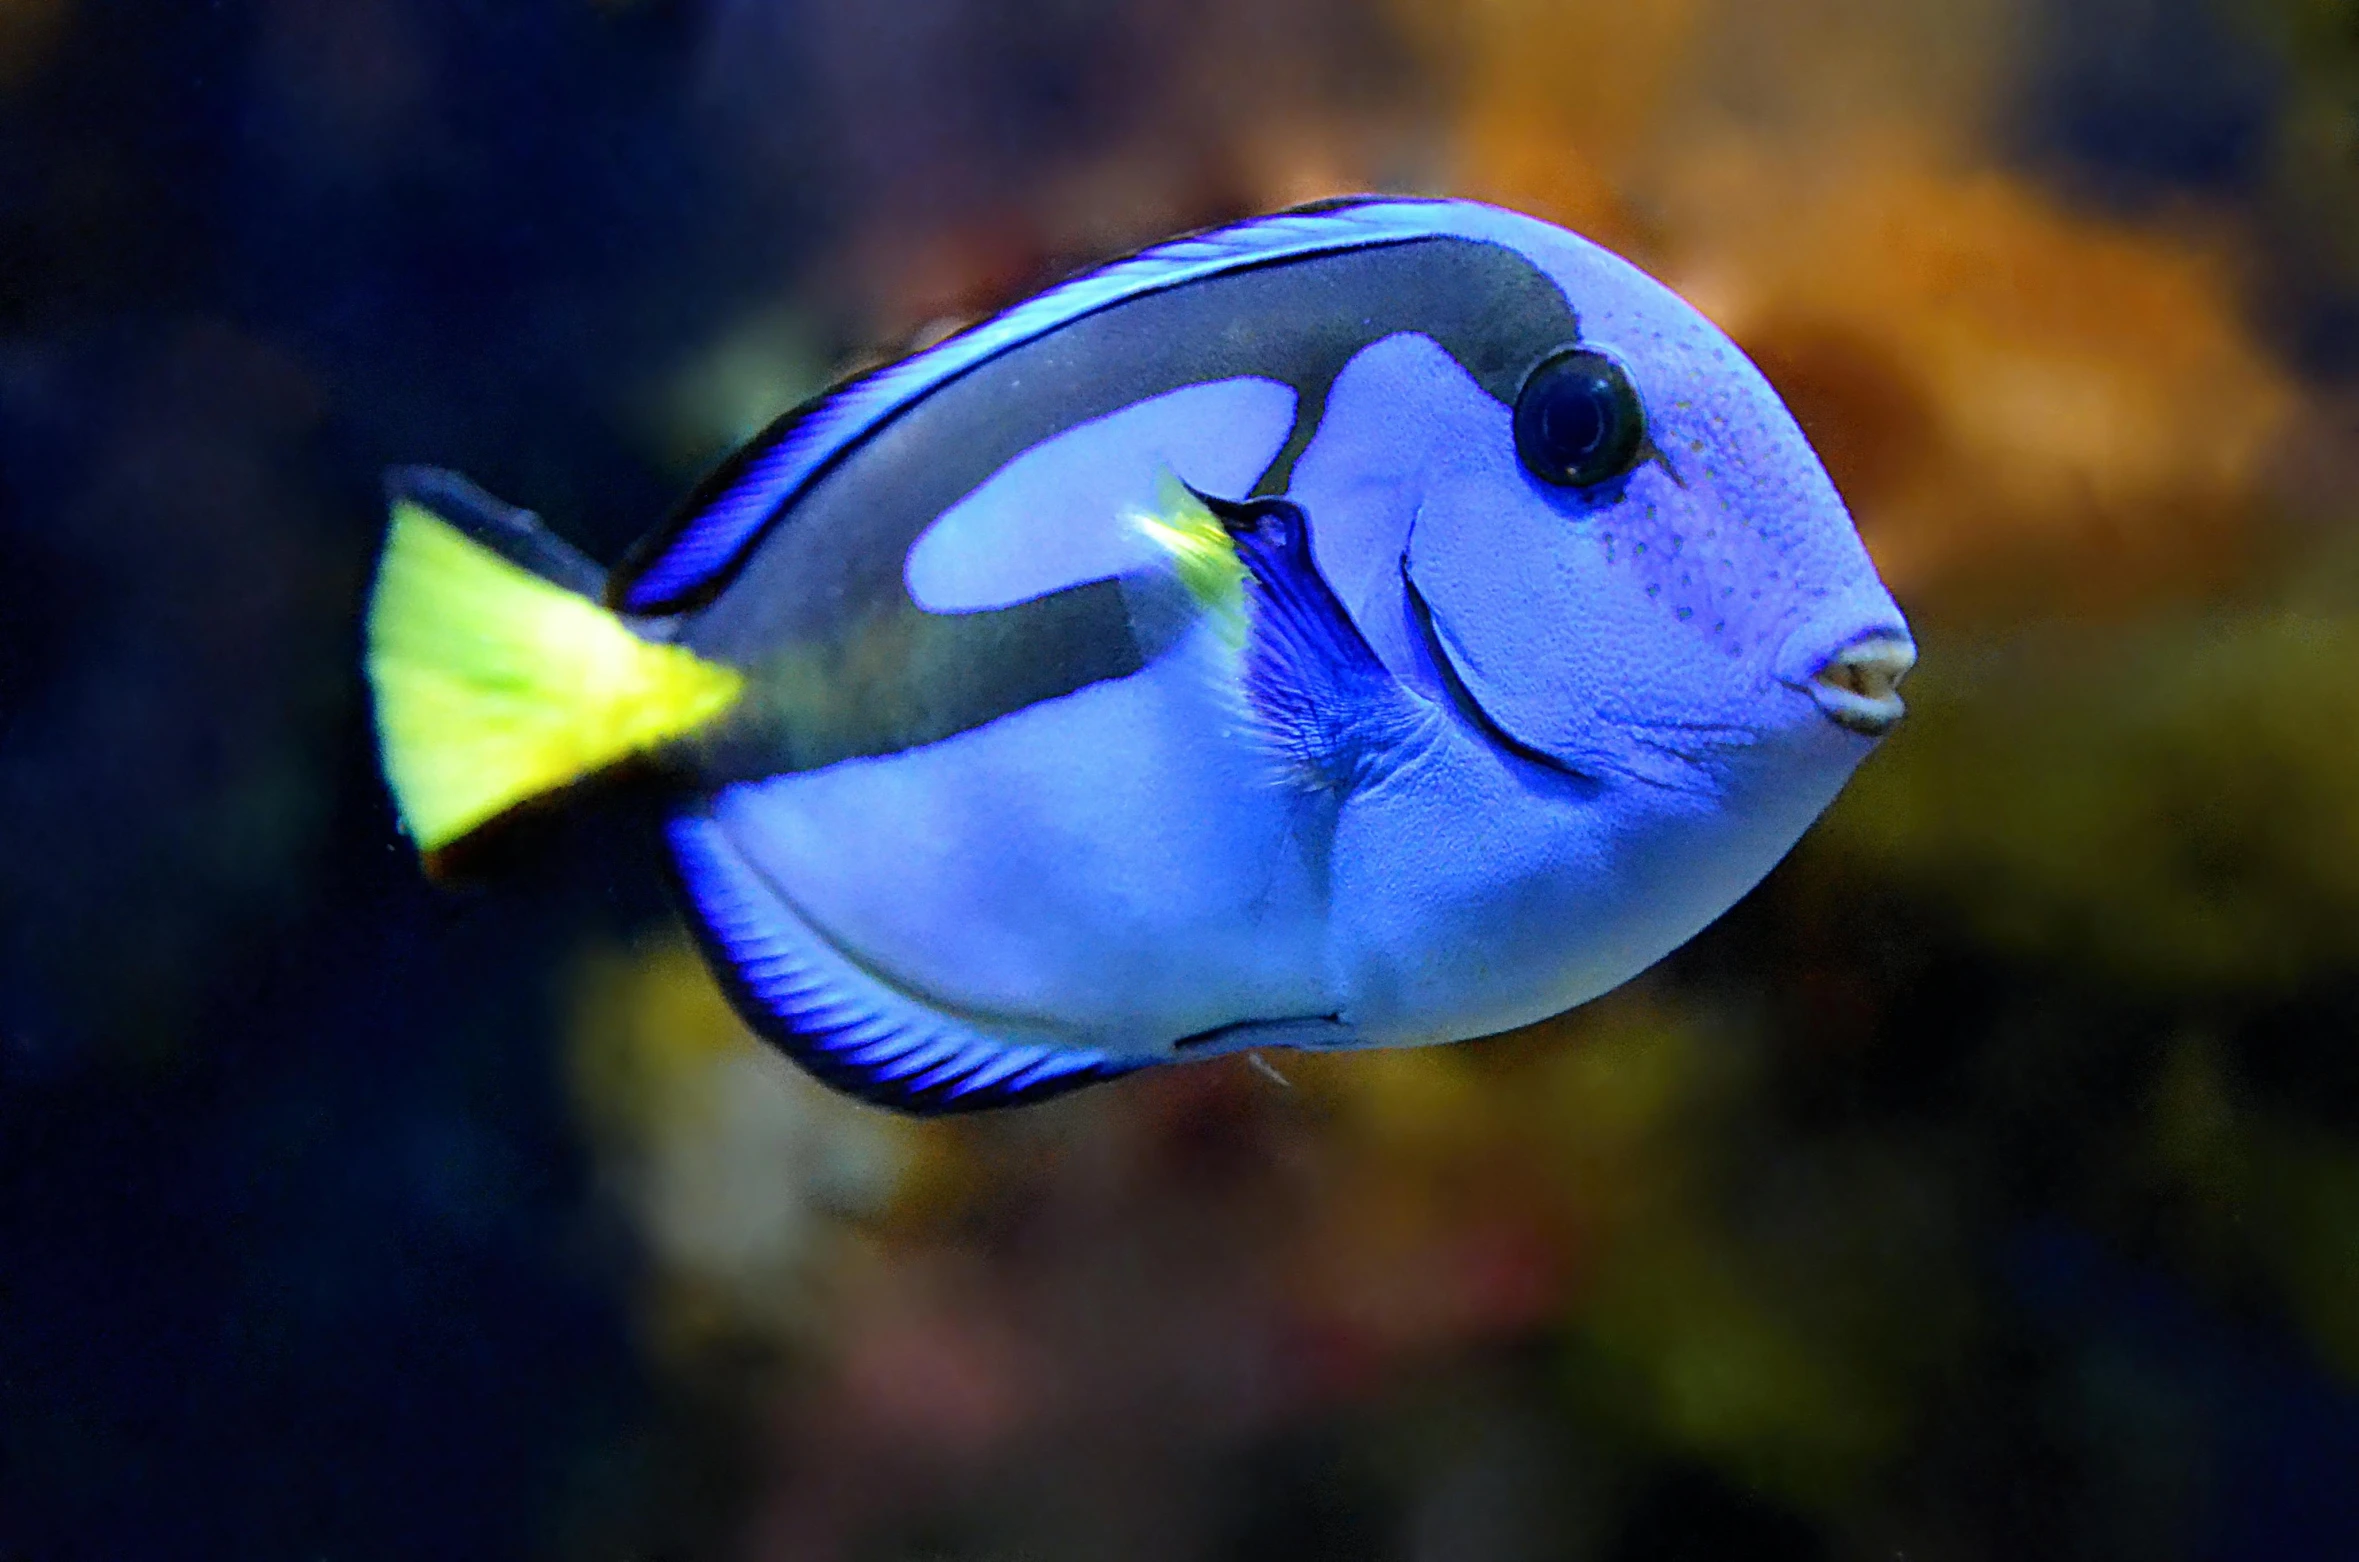 a close up of a blue and yellow fish